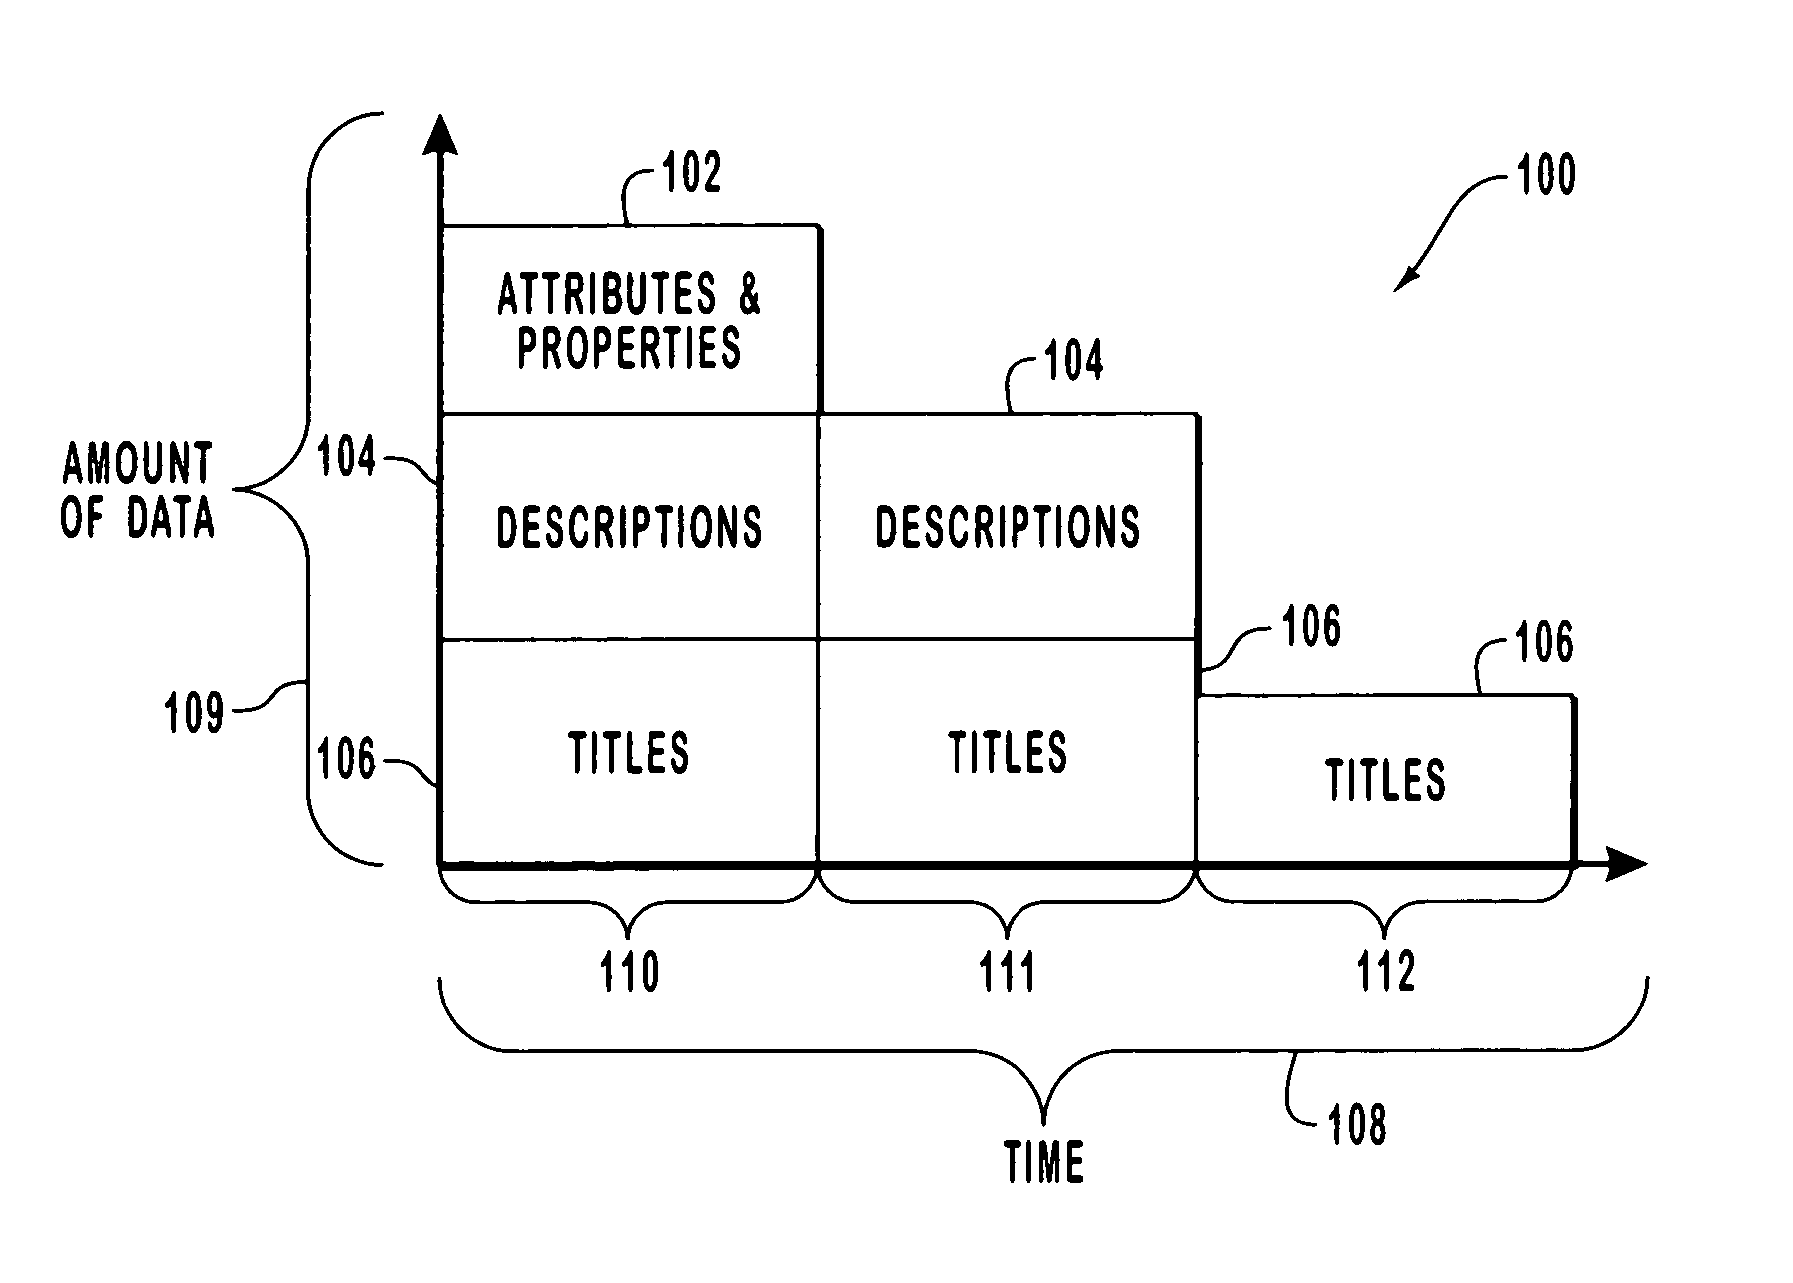 Systems and methods for electronic program guide data services